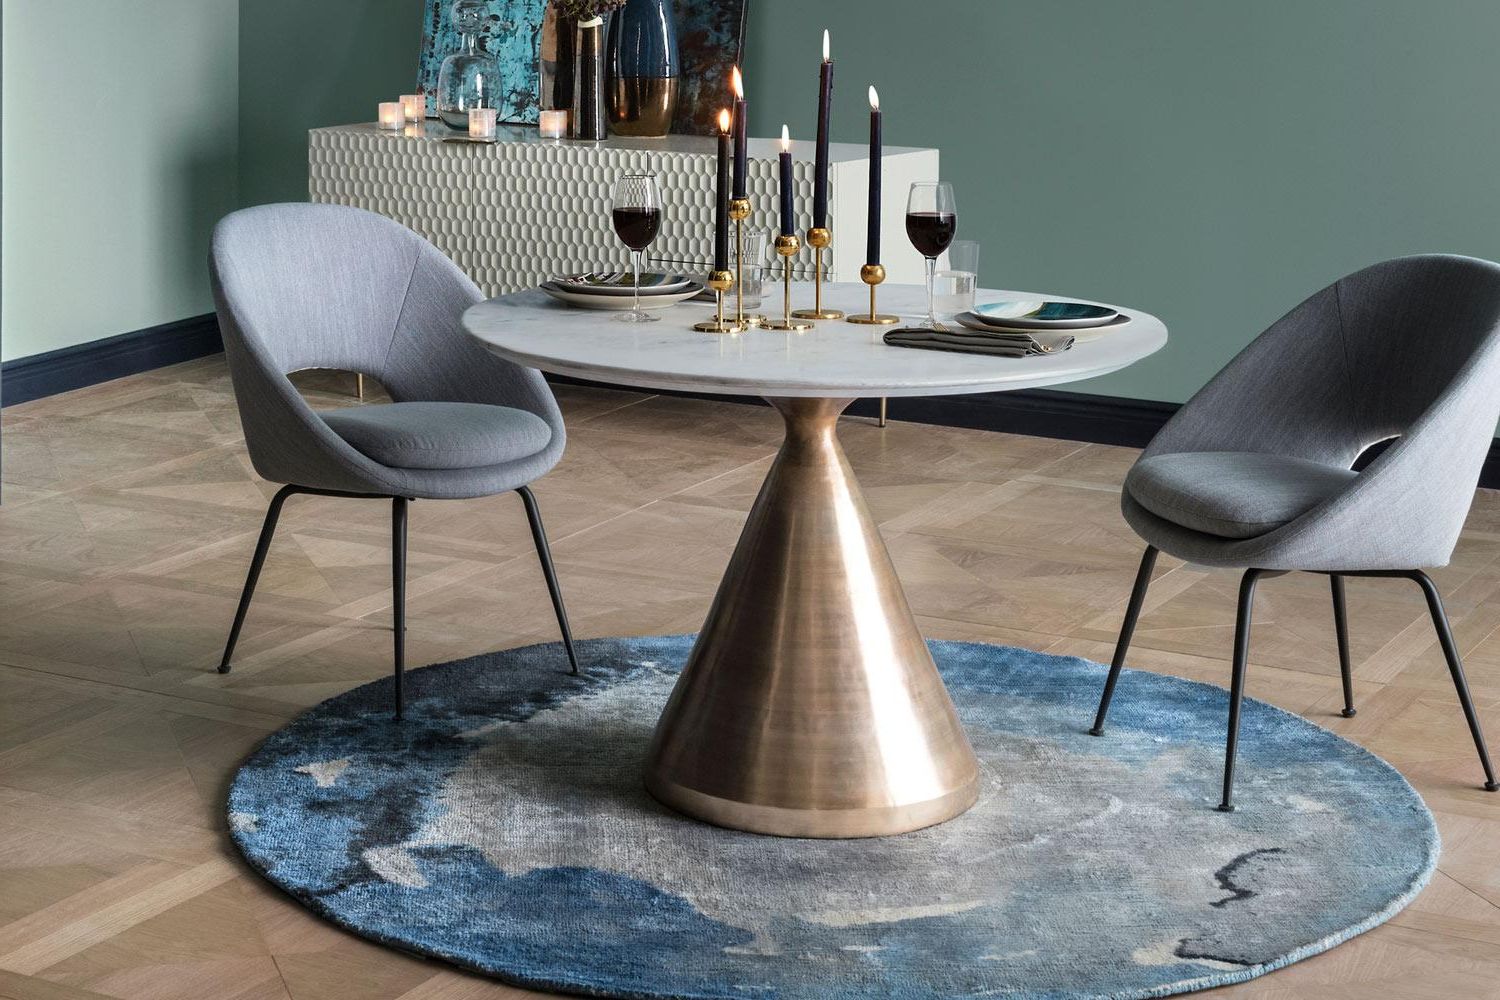 Current Best Dining Tables: The Best Stylish Dining Room Tables 2019 With Black Top  Large Dining Tables With Metal Base Copper Finish (Photo 7 of 25)